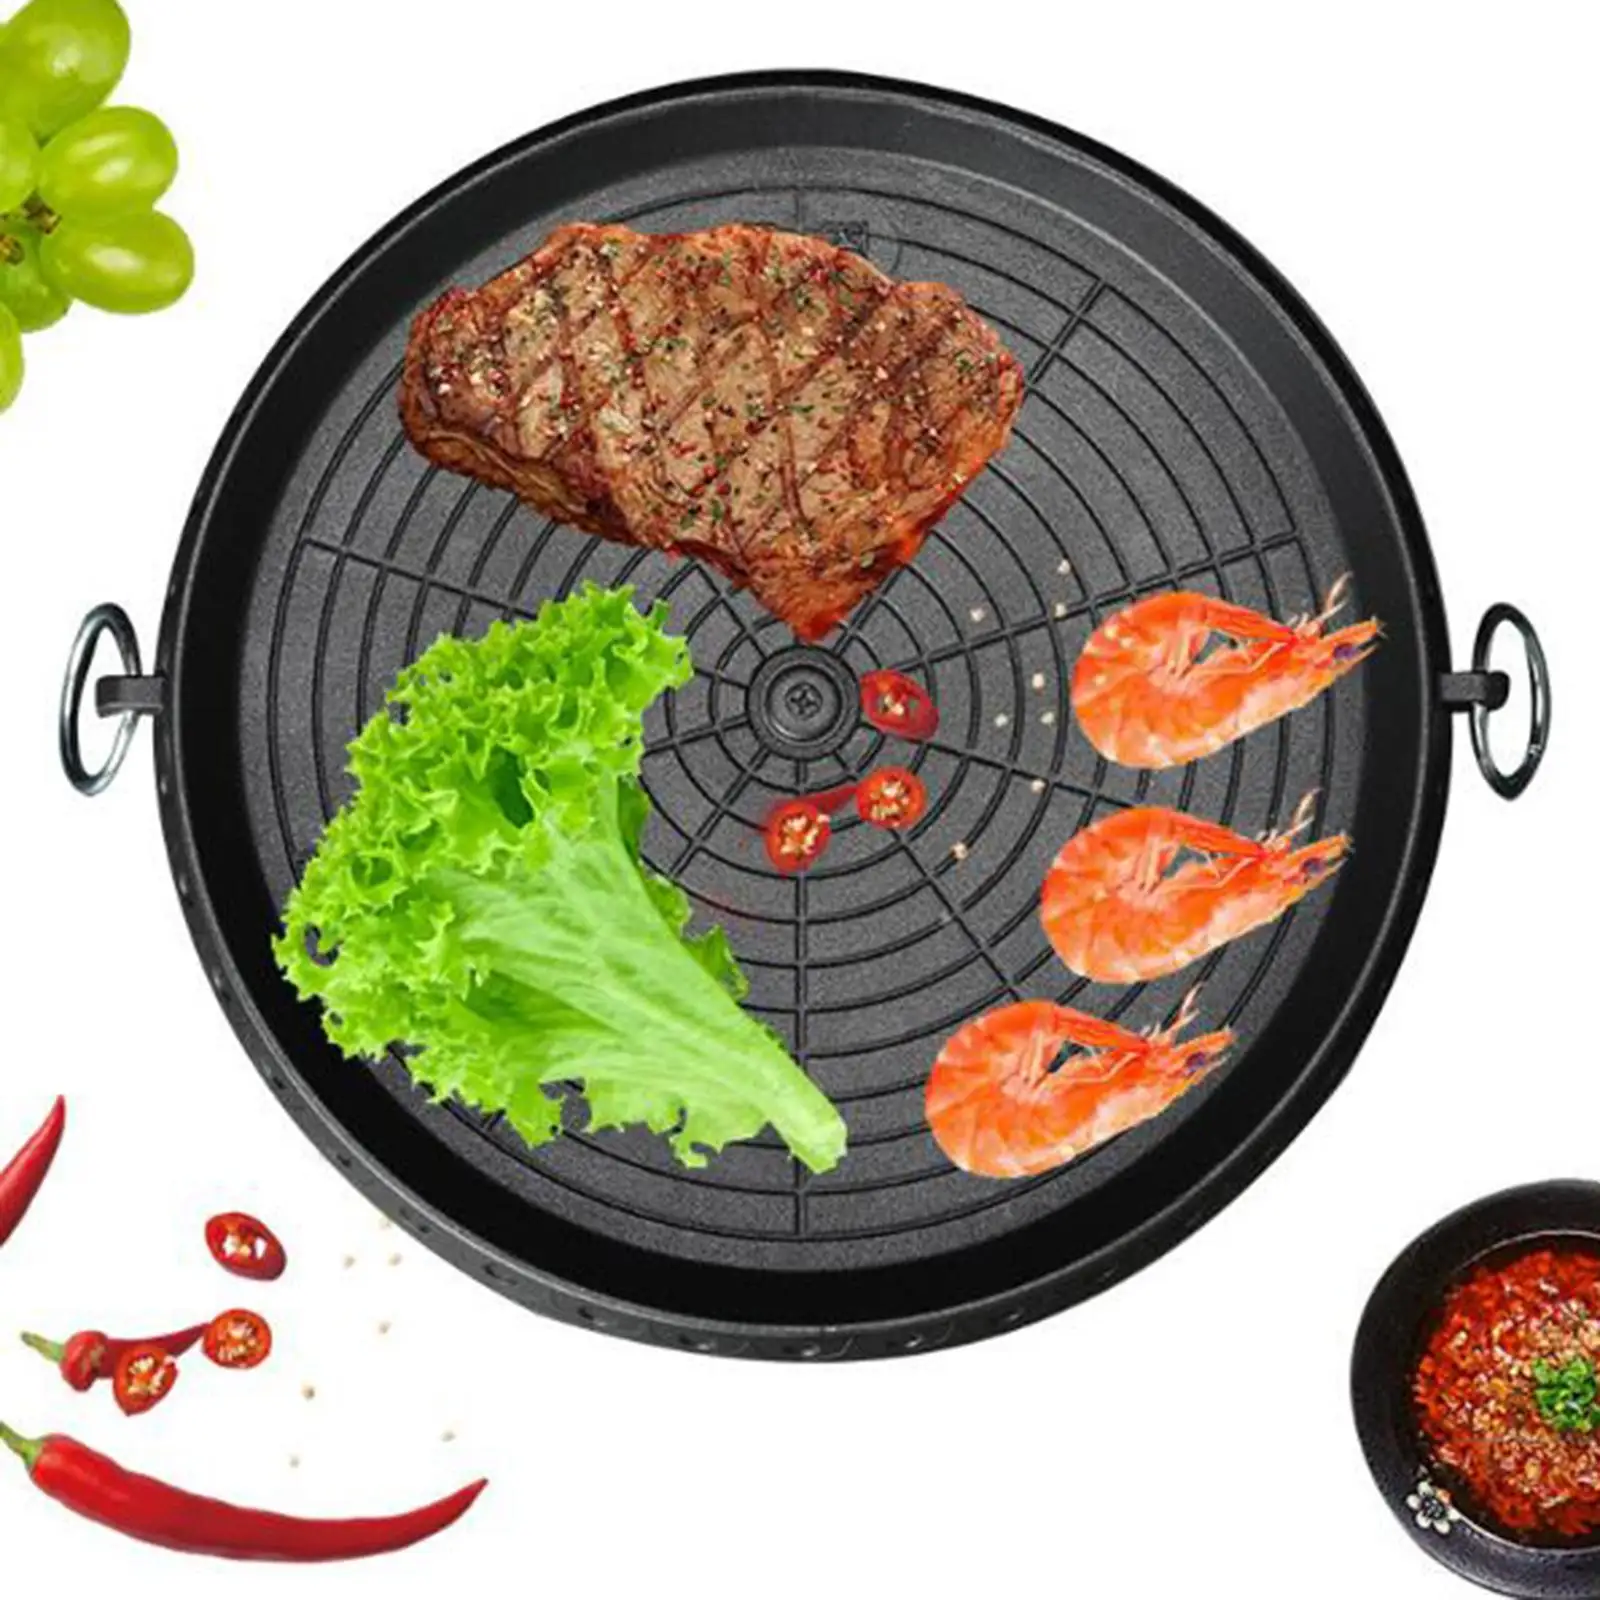 Portable Frying Pan Griddle Non Stick Grill Pan Steak Barbecue Grilling